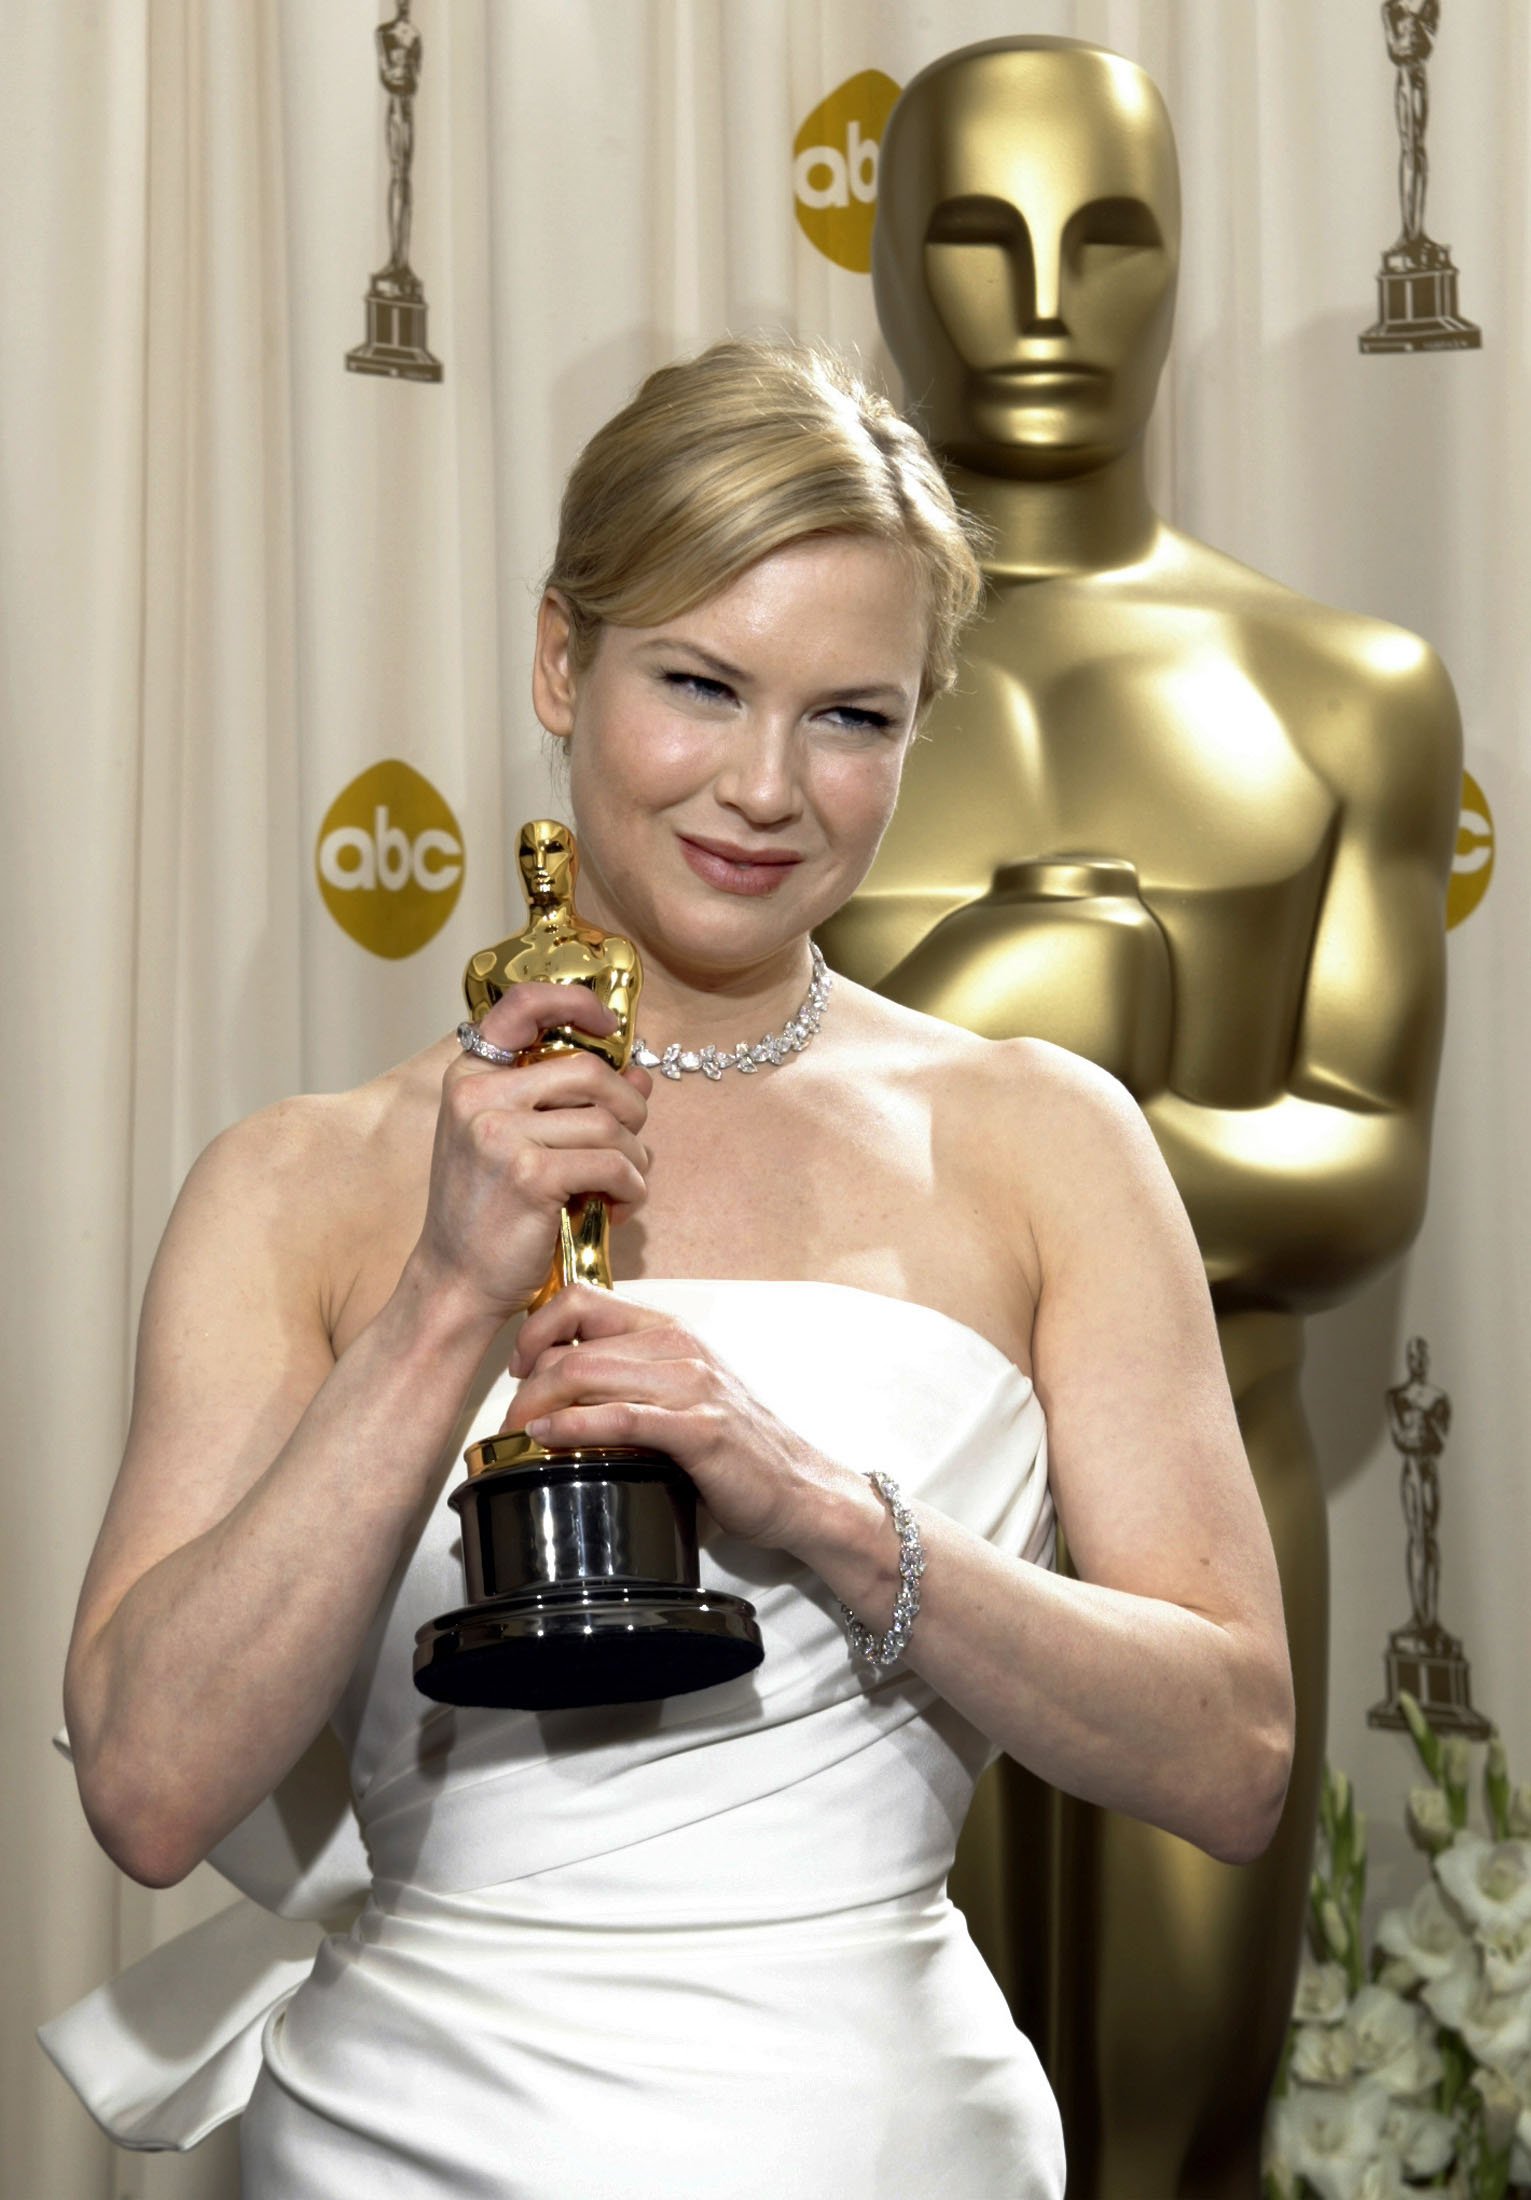 Renée Zellweger backstage at the 76th annual Academy Awards where she won the Academy Award for Best Supporting Actress for her role in the film Cold Mountain